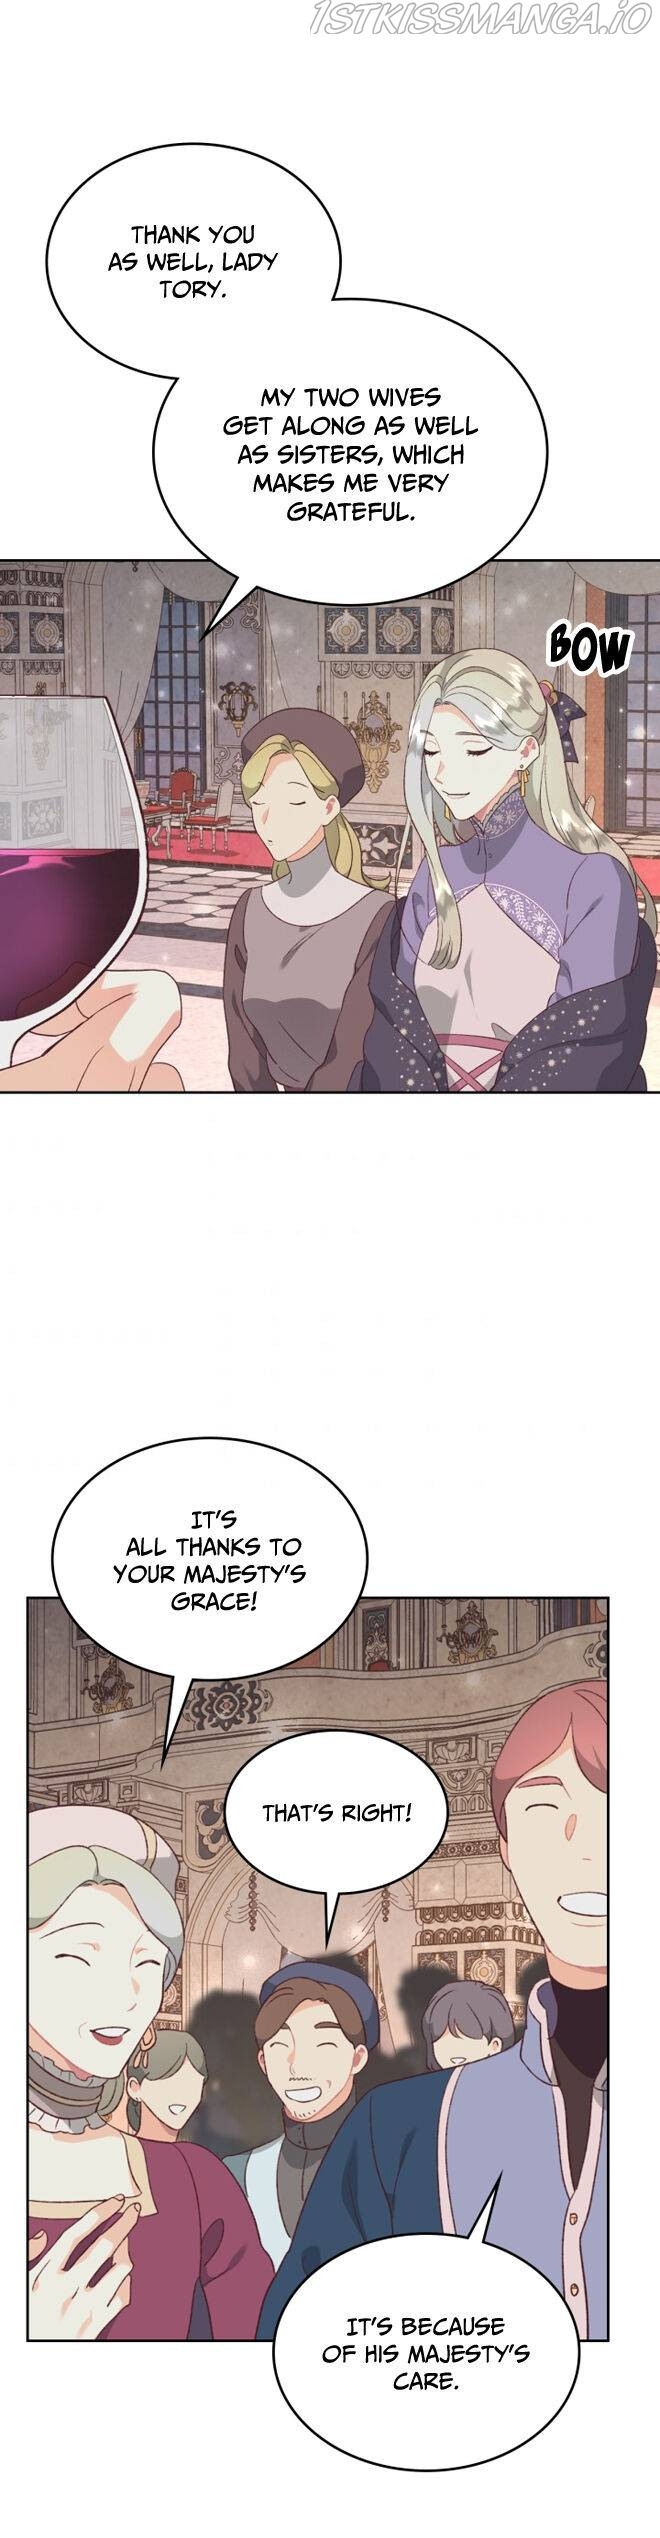 Emperor And The Female Knight ( The King and His Knight ) Chapter 133 - Page 4